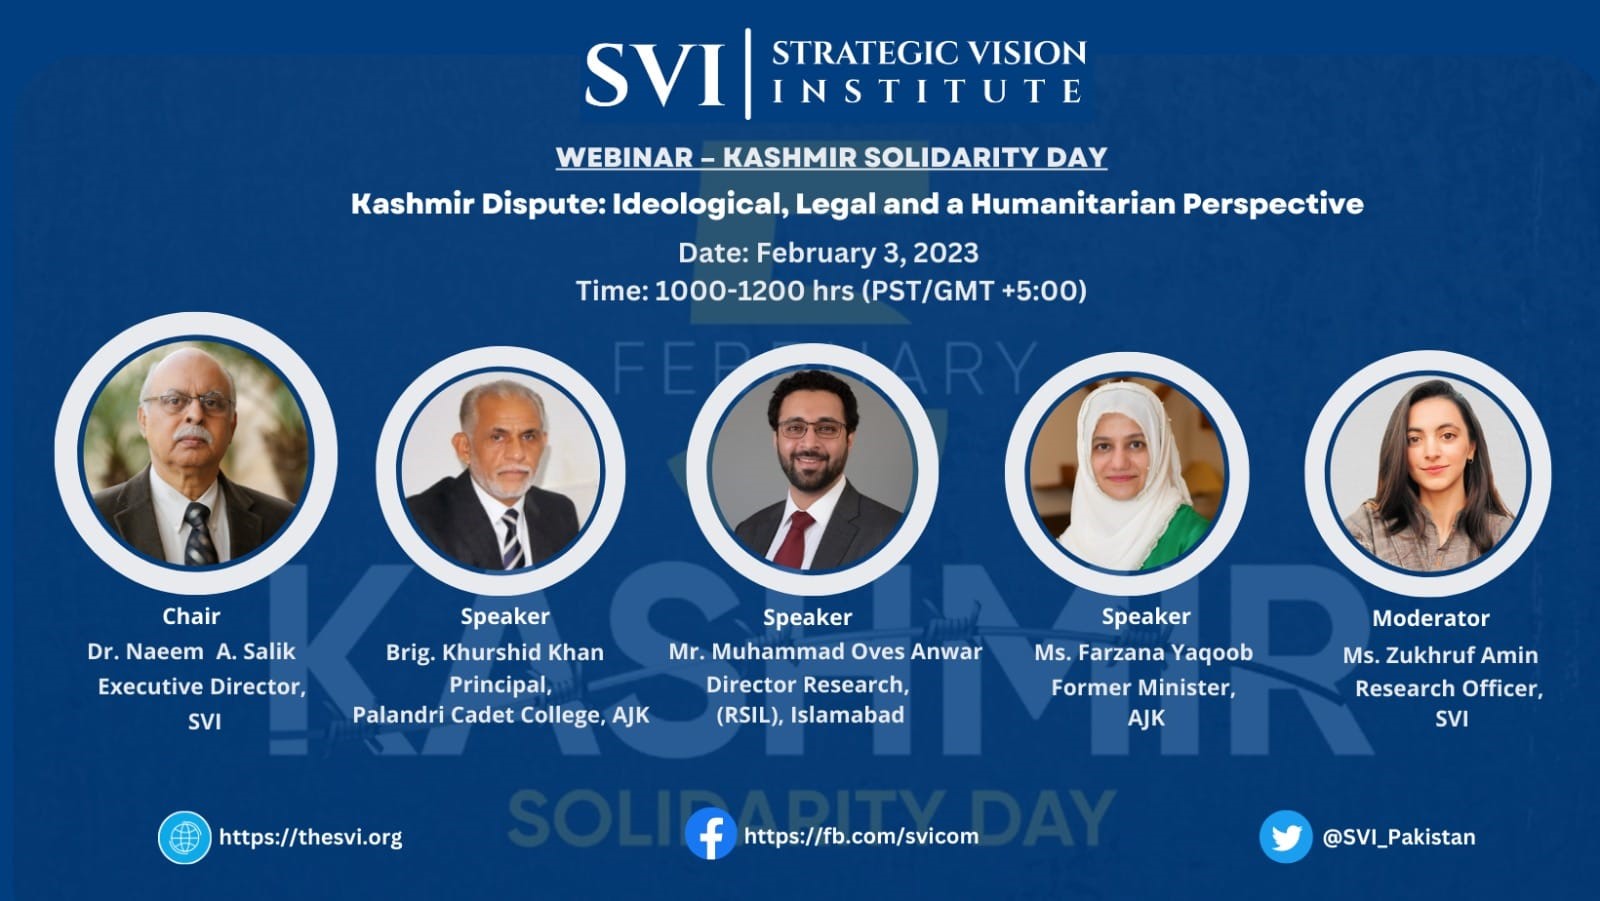 Webinar-Report “Kashmir Dispute: Ideological, Legal and a Humanitarian Perspective”-Kashmir Solidarity Day on February 03, 2023